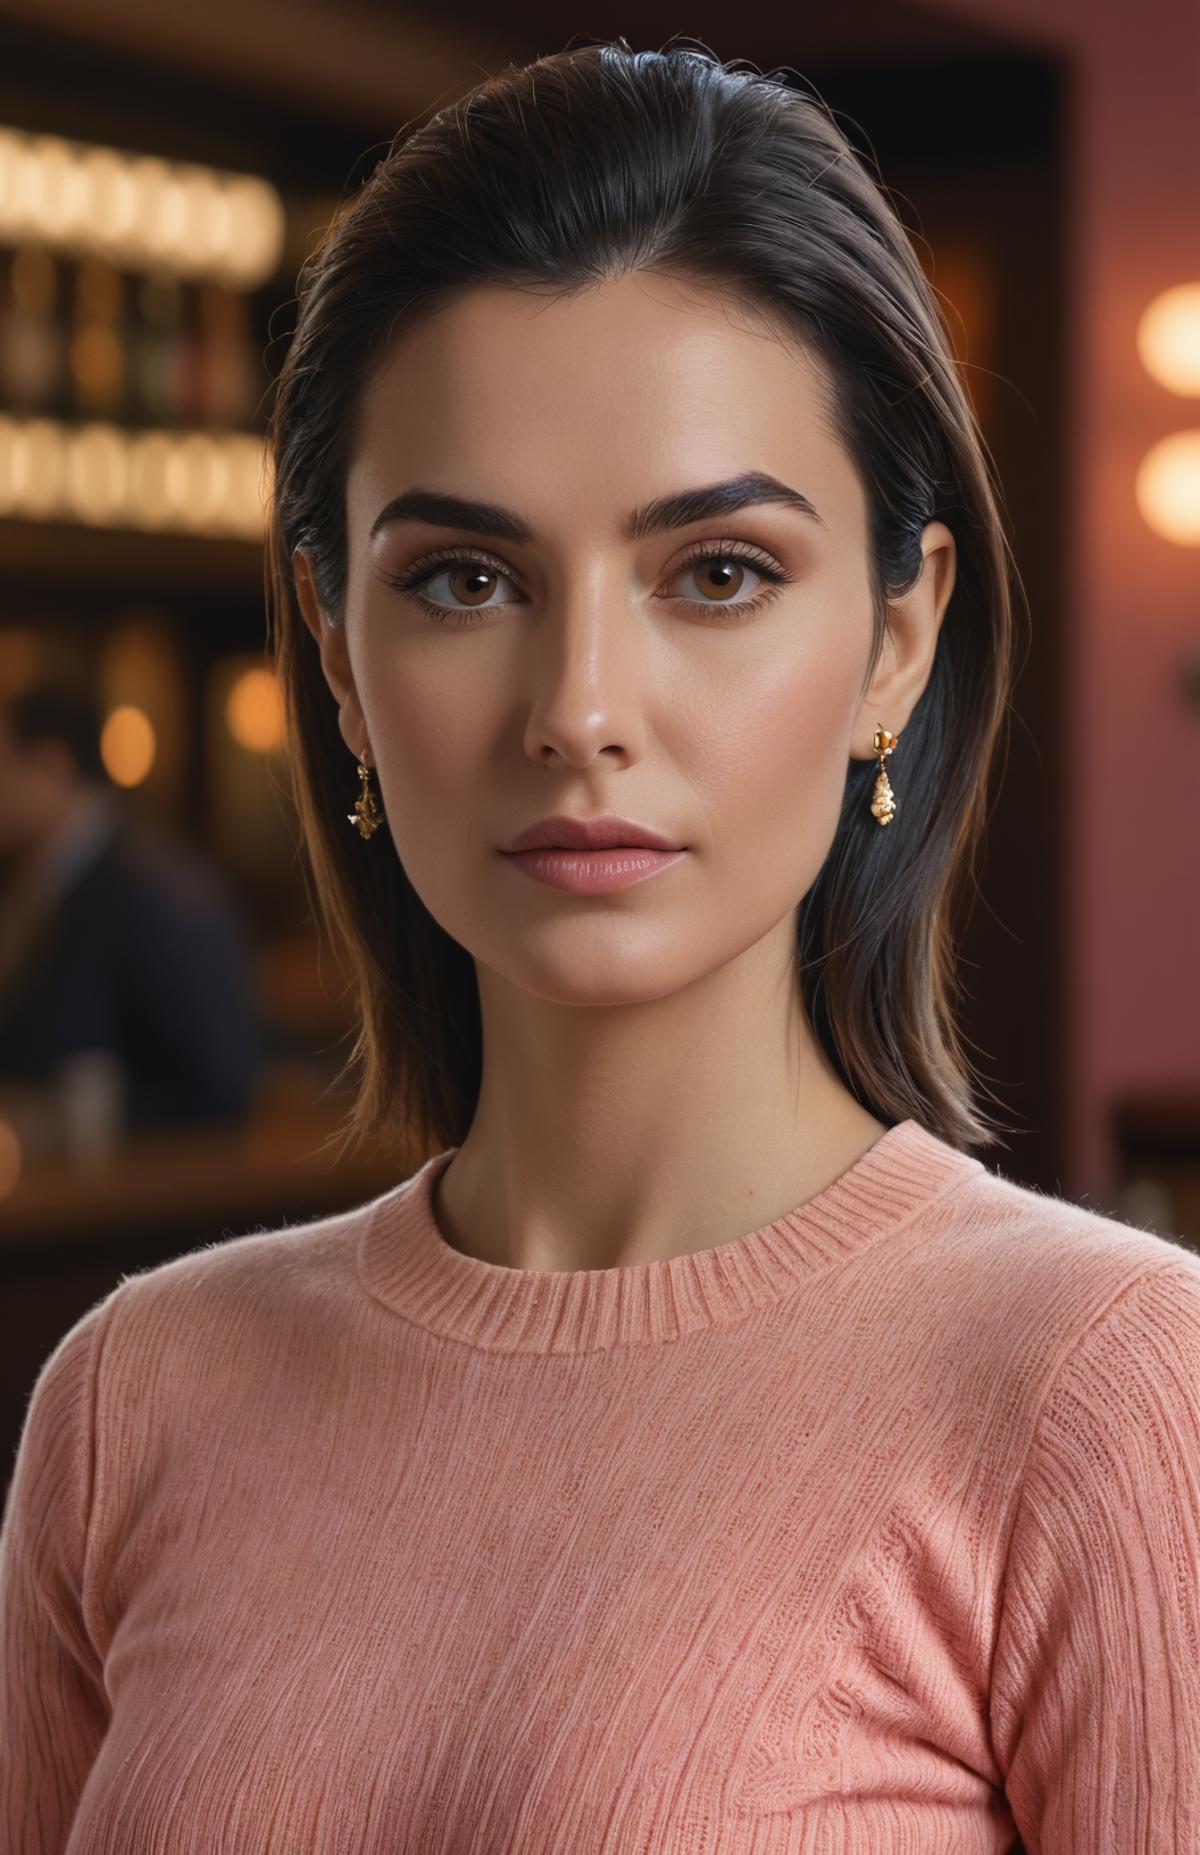 A woman with brown hair, pink sweater, and gold earrings looking at the camera.